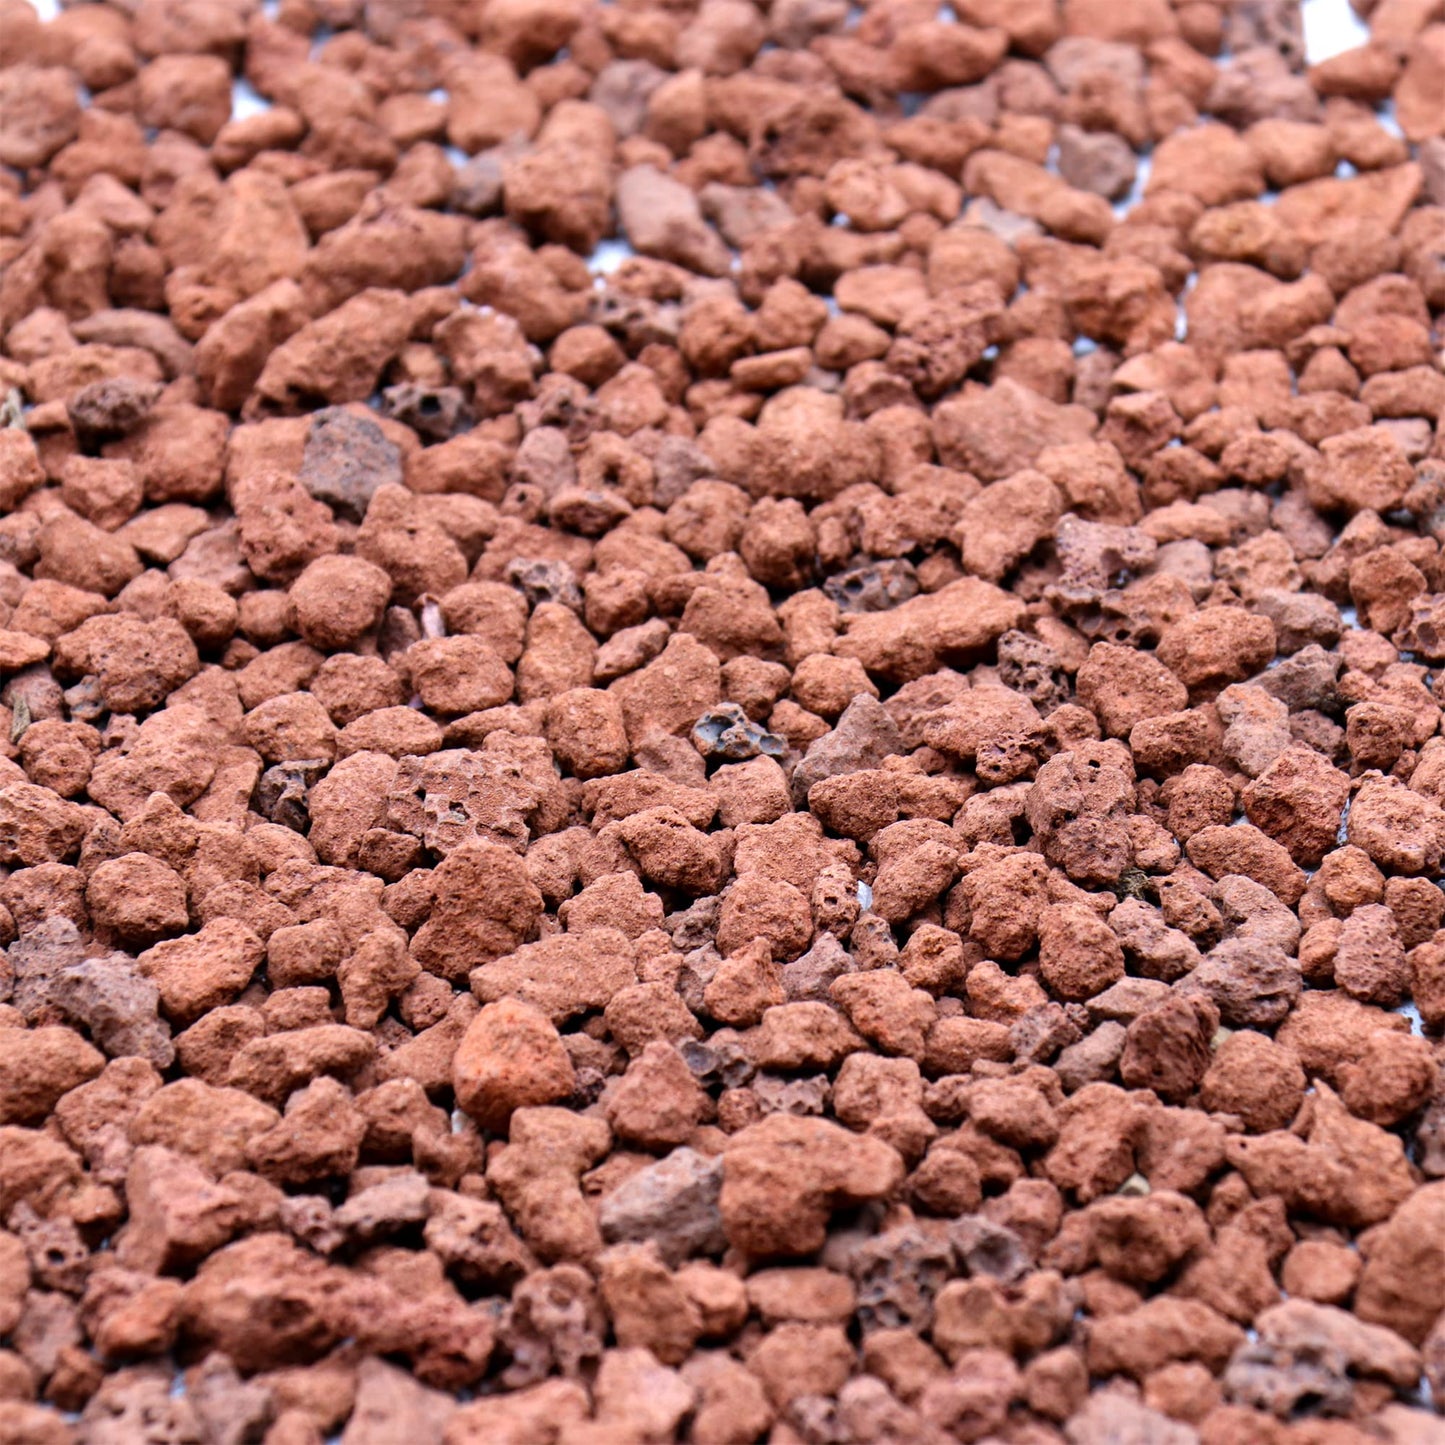 Premium Pebbles Volcanic Rock for Plants. Red Lava Rock. 1/5 Inch - 2 lbs for Potting Soil, Succulents, Pots, Plants, Gardening, Indoor, Crafting (Mini (0.2 Inch), Horticultural - RED Lava, 2)